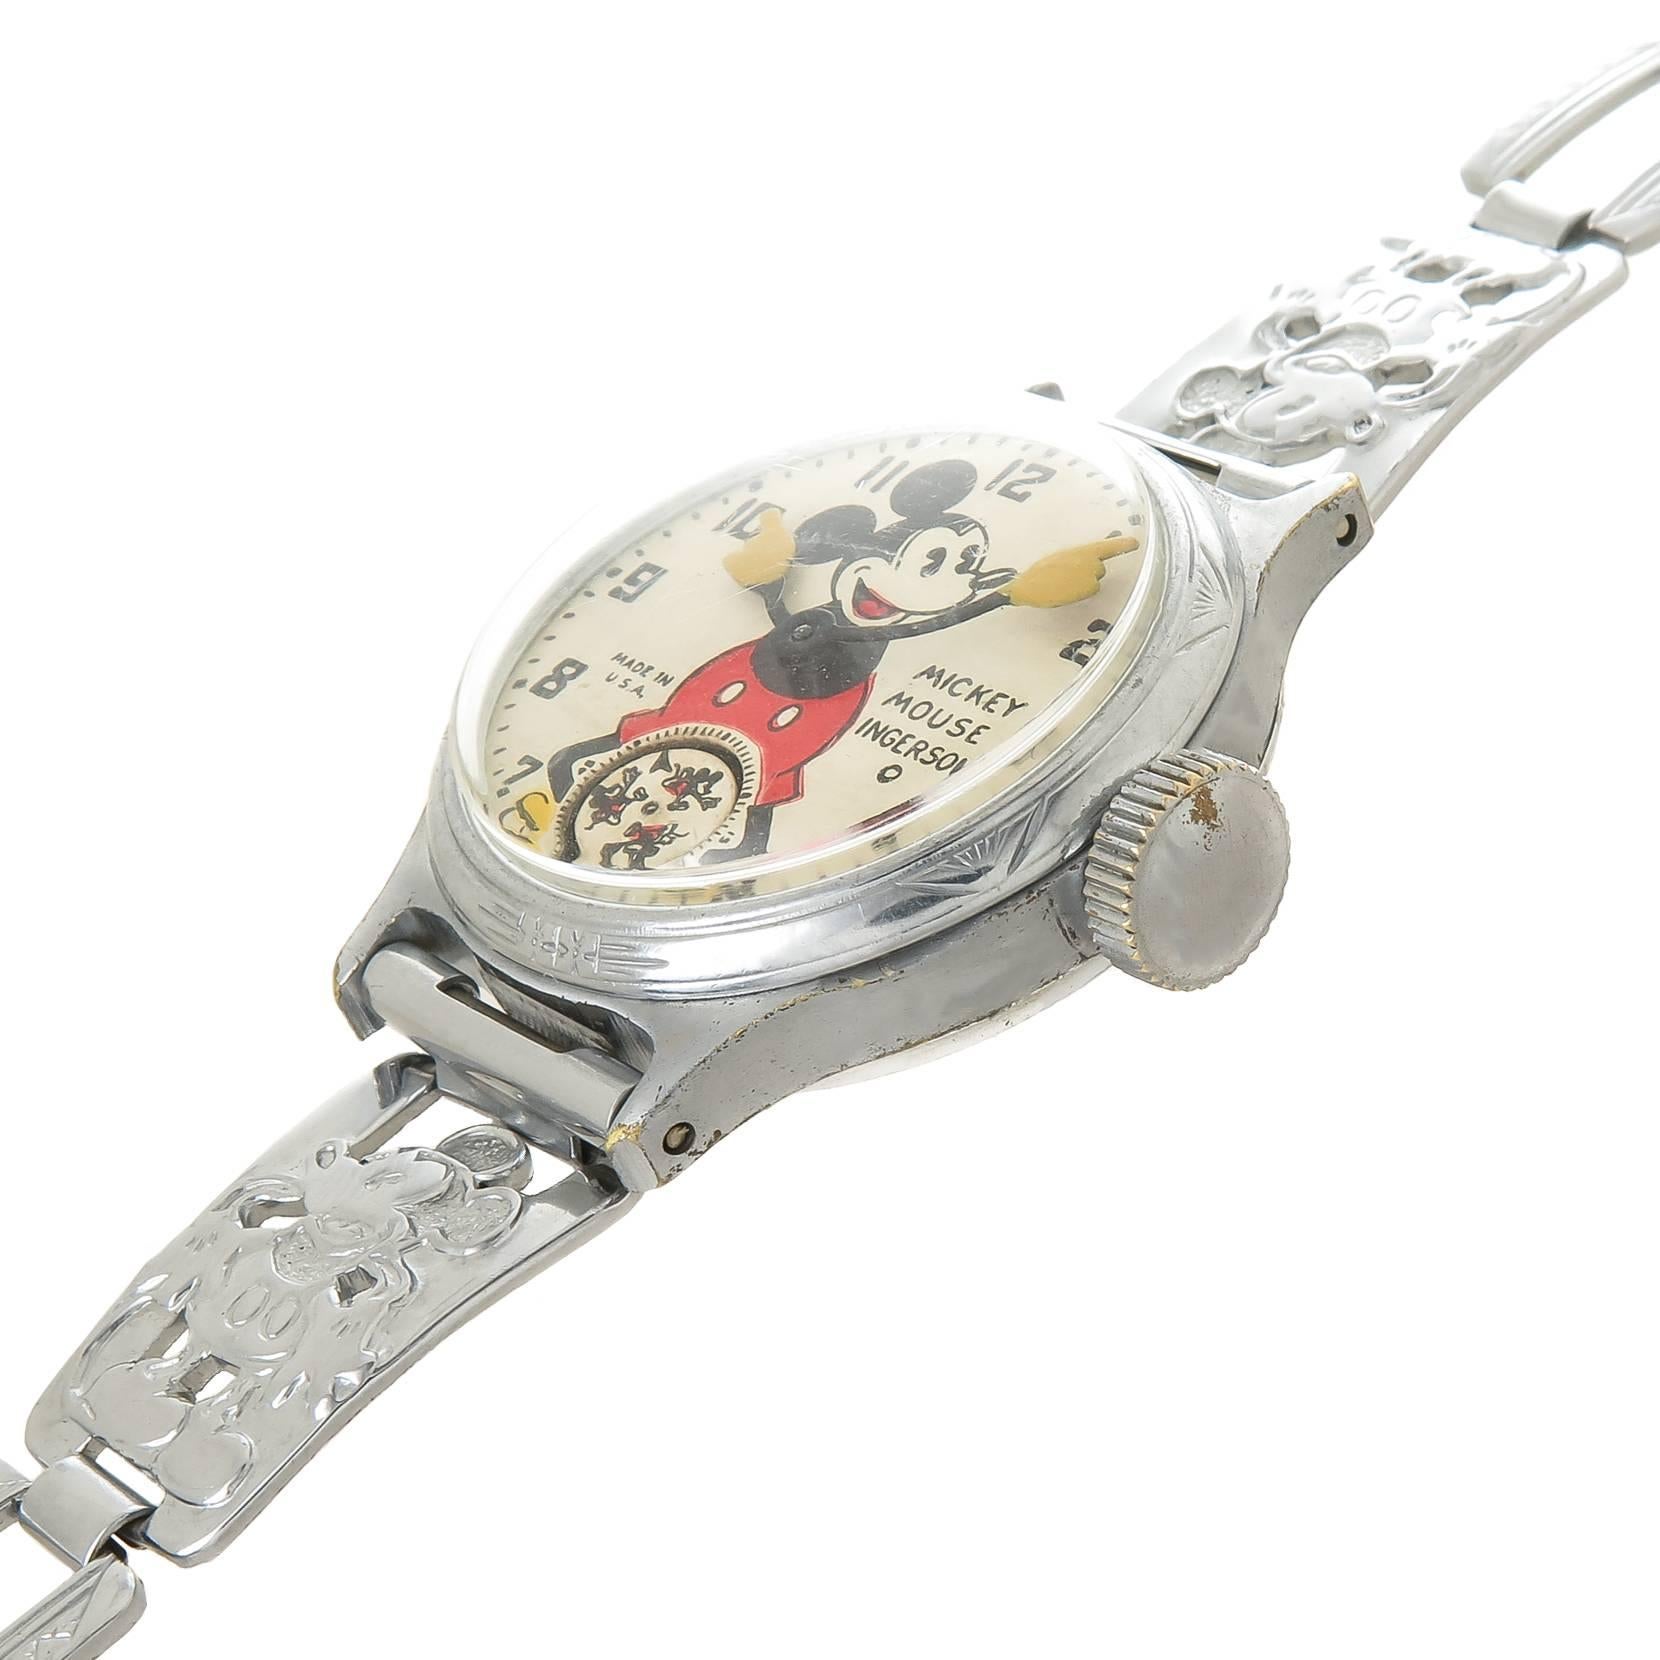 Circa 1933 Ingersoll Mickey Mouse Wrist Watch, This watch belonged to American Artist and Sculptor Ernest Trova ( 1927-2009 ) I had the pleasure of knowing Mr. Trova in the Early 1990s, we shared the same interest in vintage Disney Character